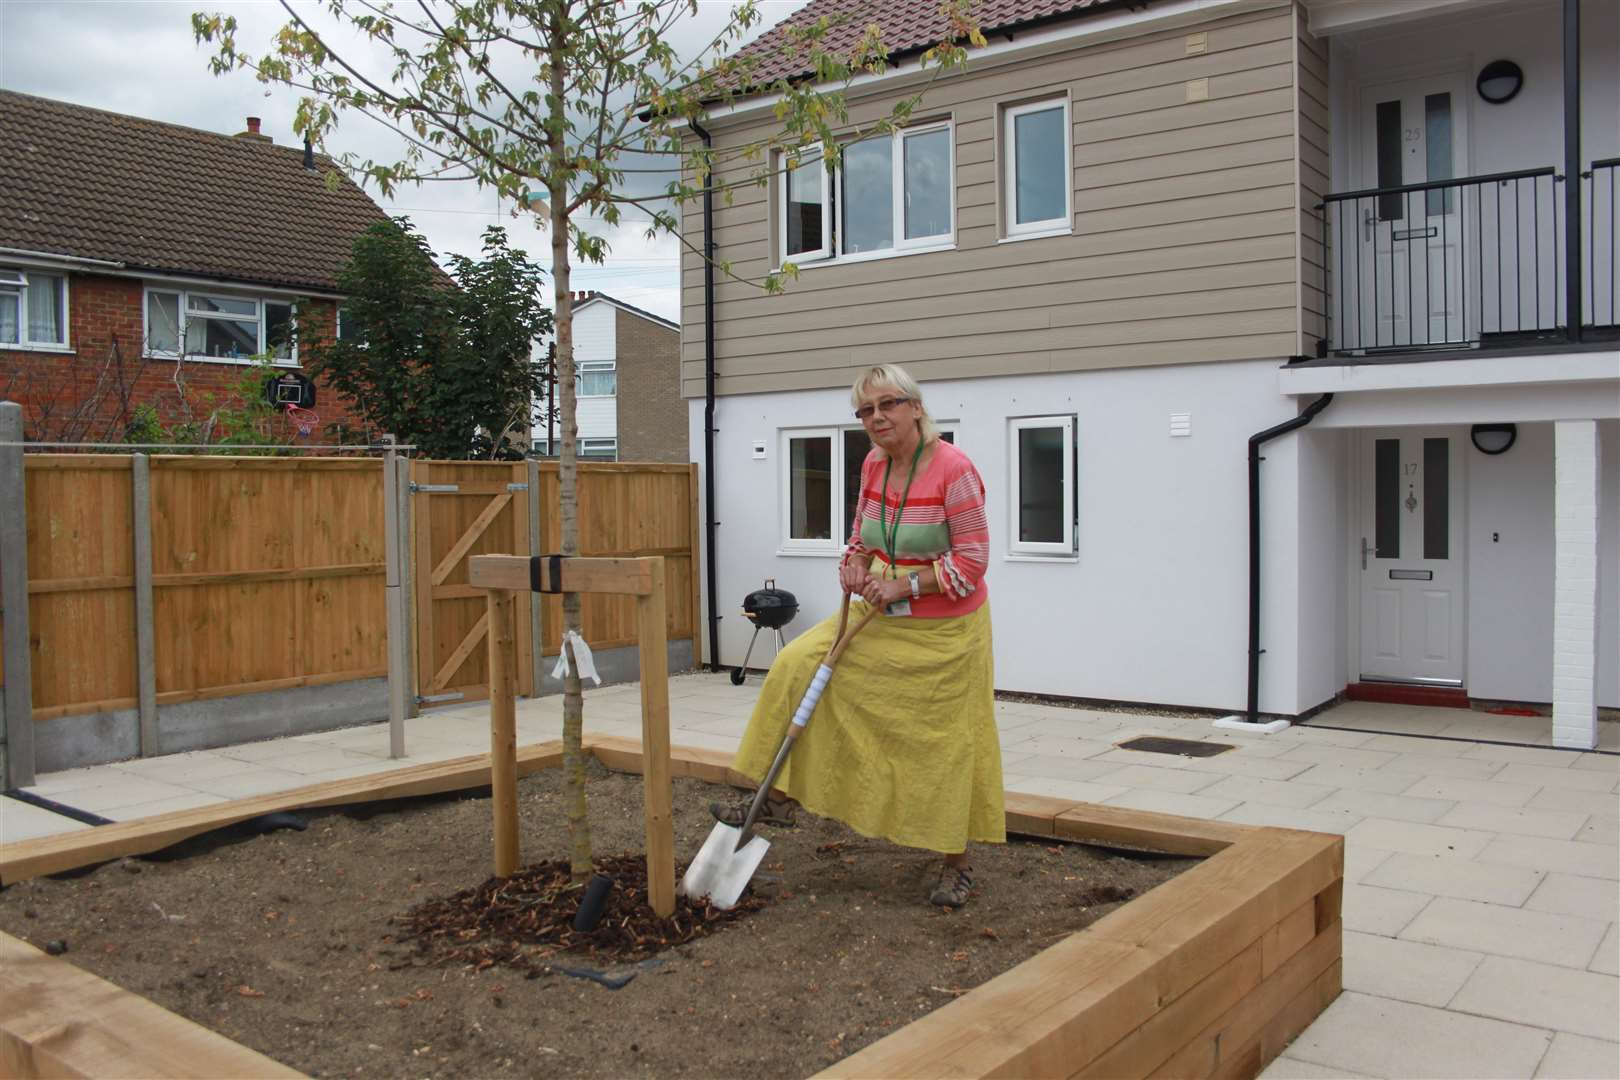 Ashford Borough Council deputy portfolio holder for housing, Cllr Aline Hicks, puts the finishing touches to some tree planting